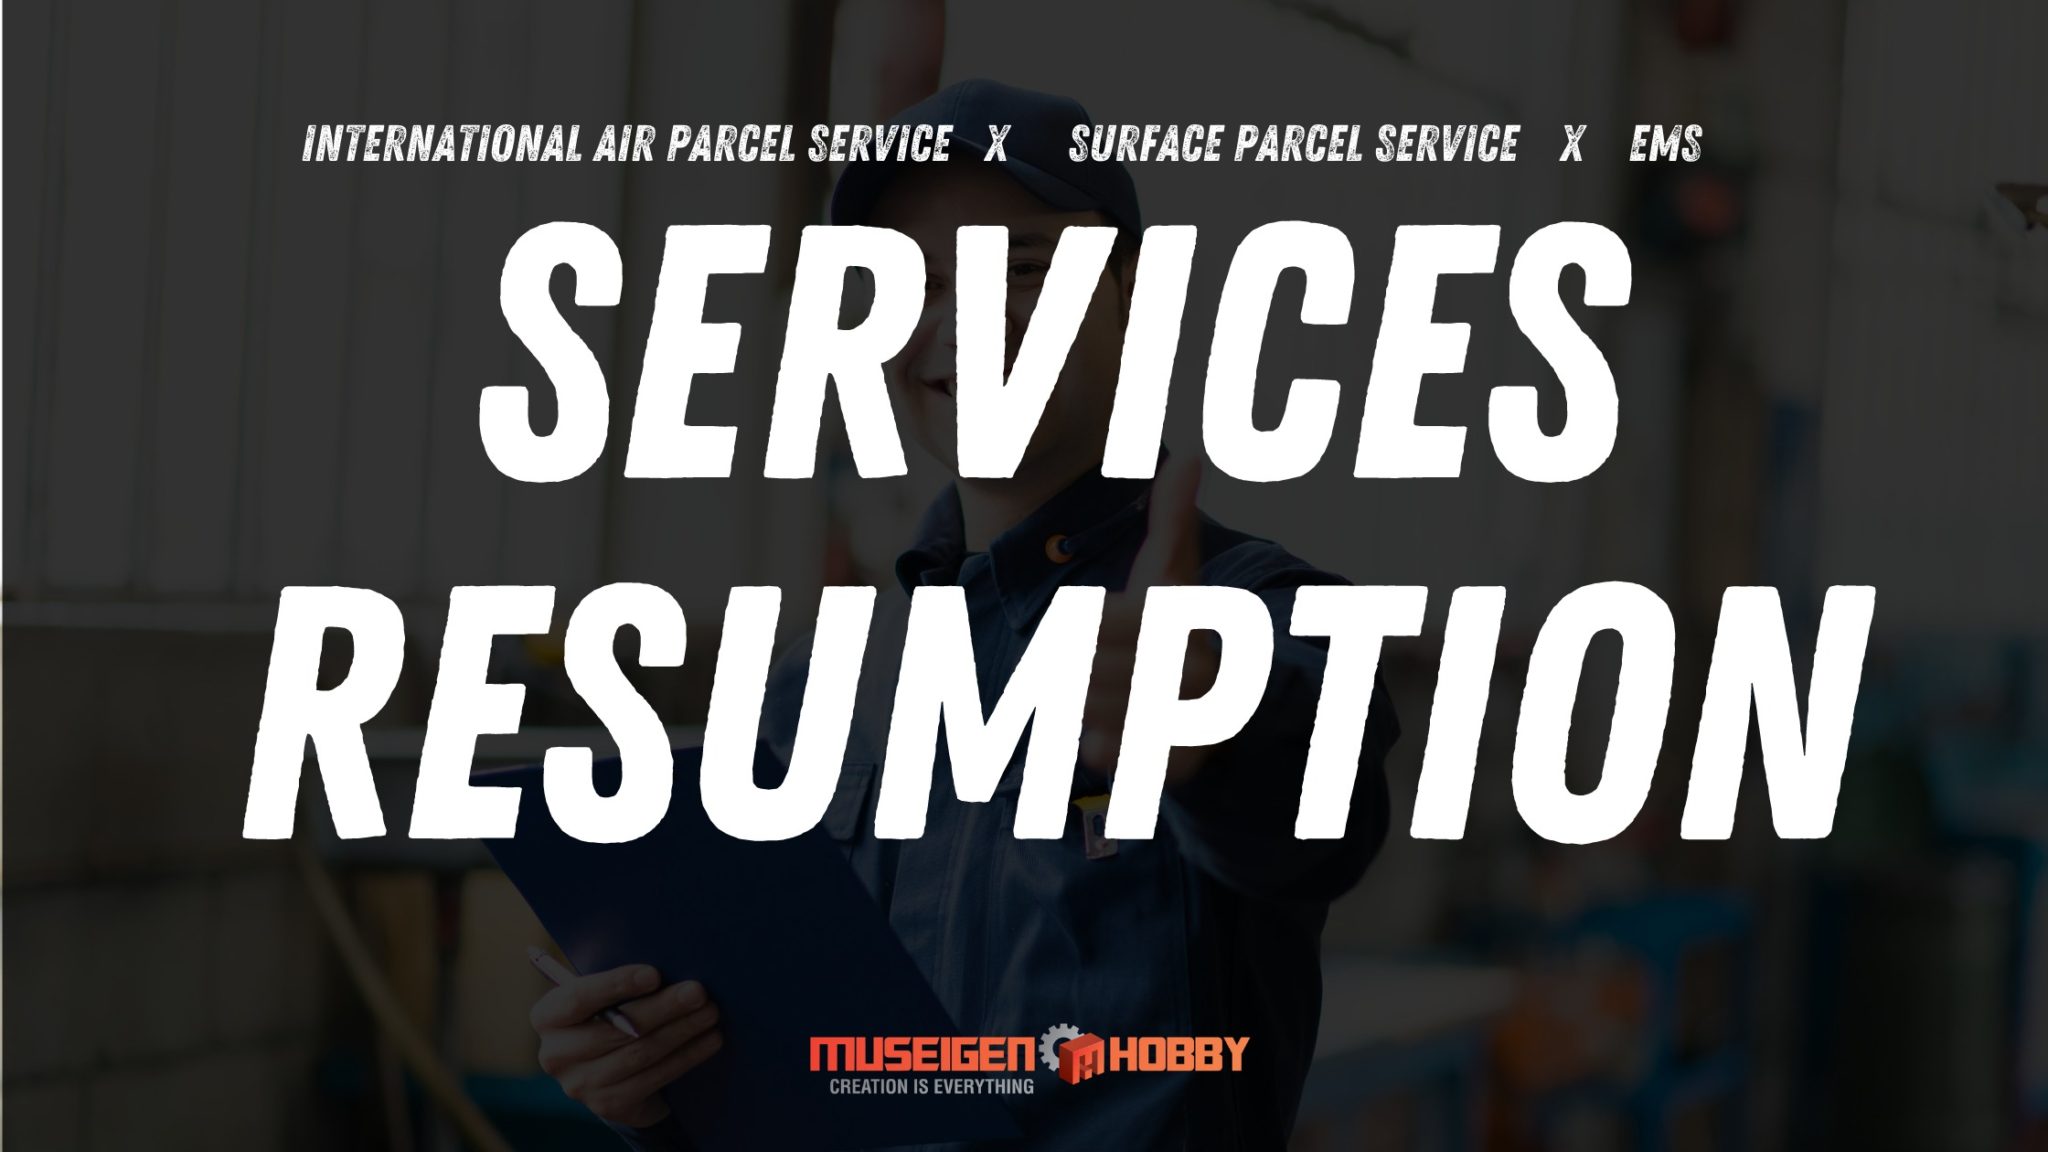 Services Resumption For International Air Parcel, Surface Parcel and EMS